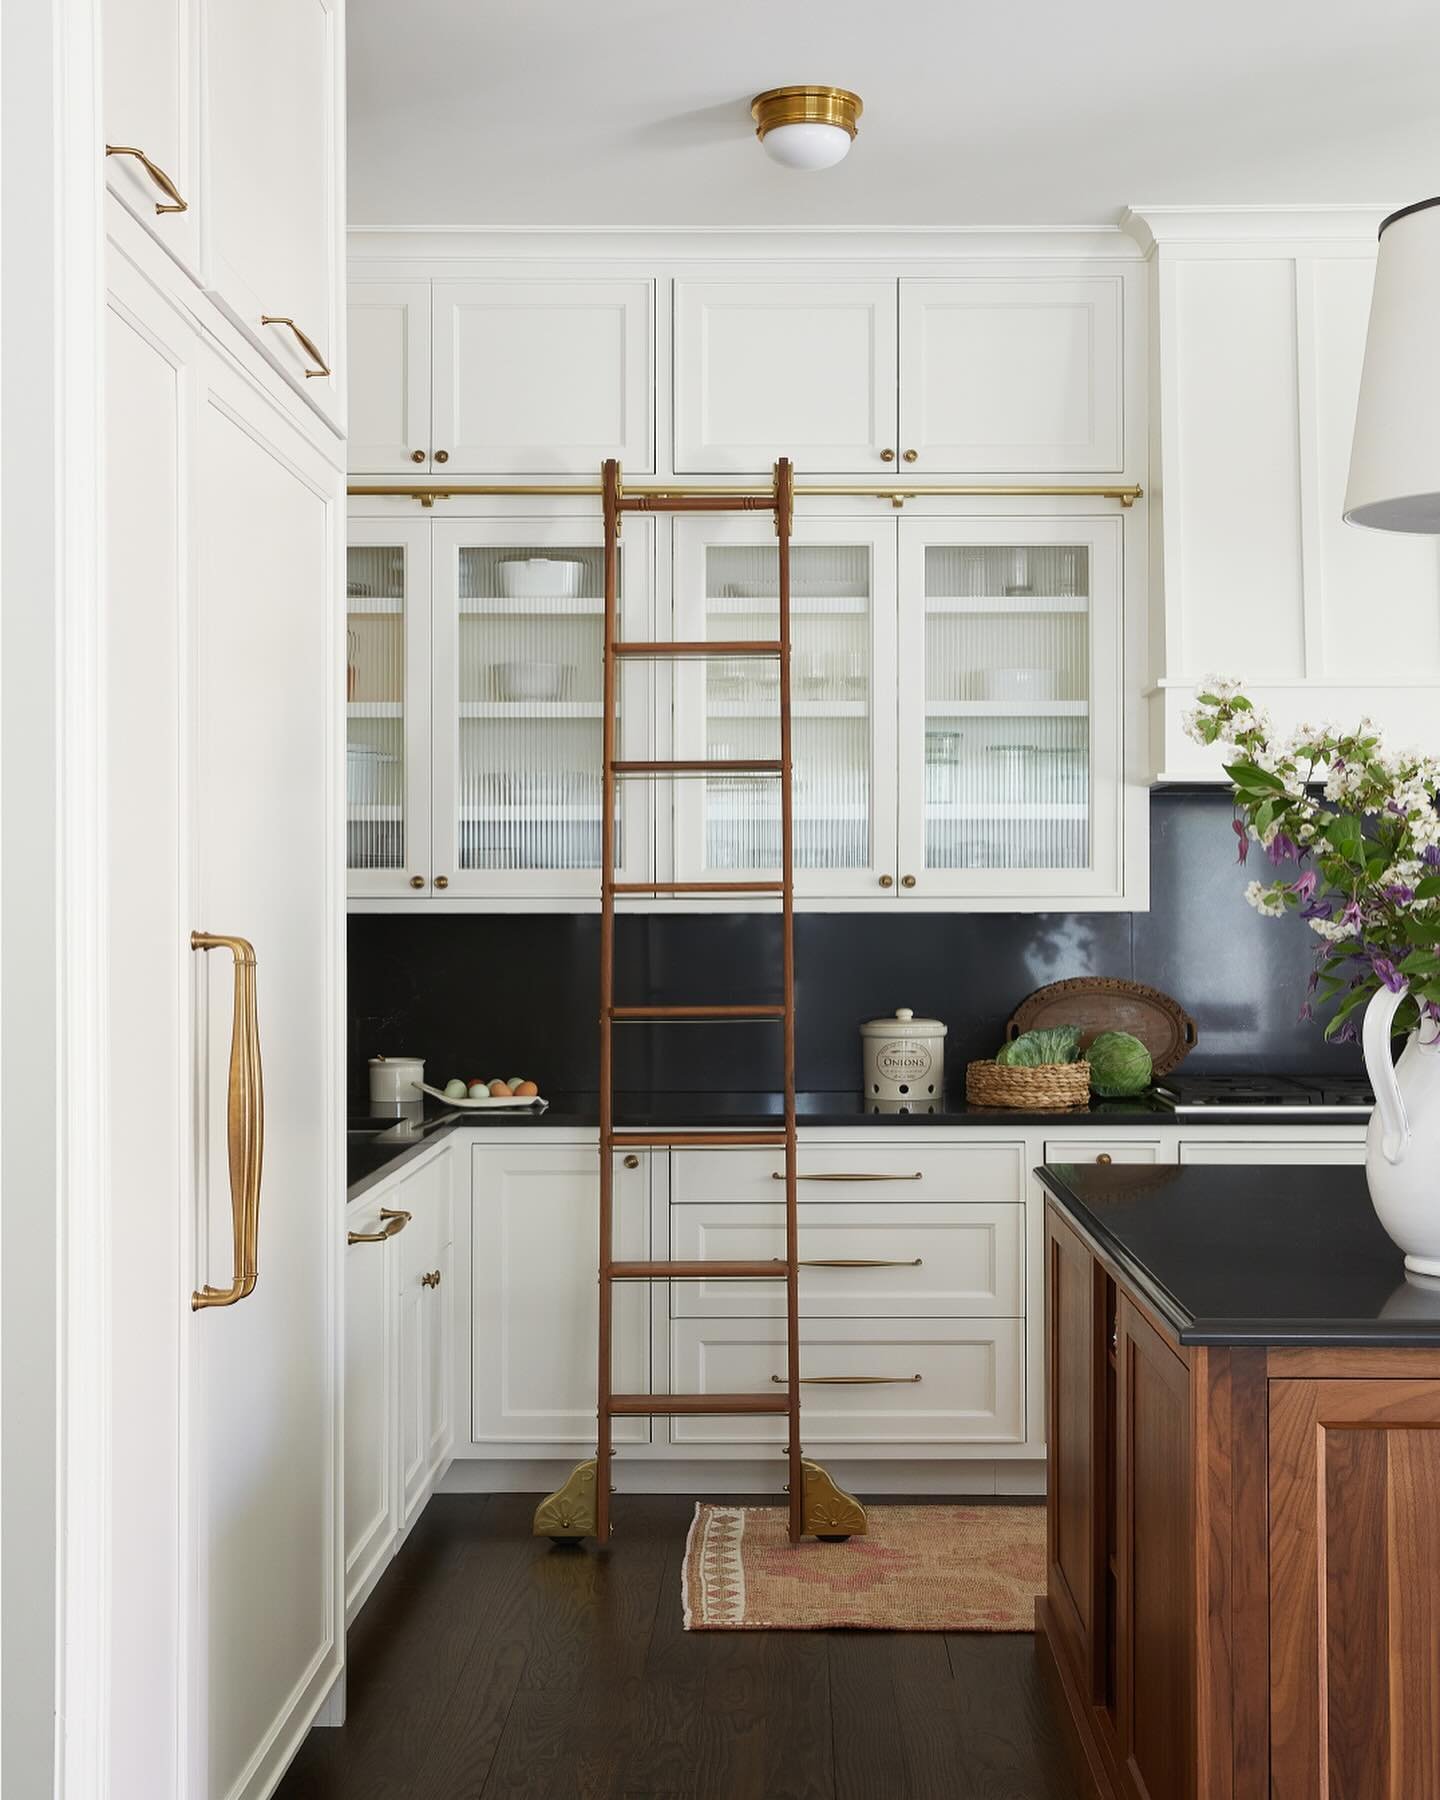 Kitchen ladders are popular these days, and we&rsquo;re into them! They provide easy access to those tallest cabinets you never feel like opening otherwise. They also add that beautiful, vintage detail to enhance the unique style of your kitchen. Wou